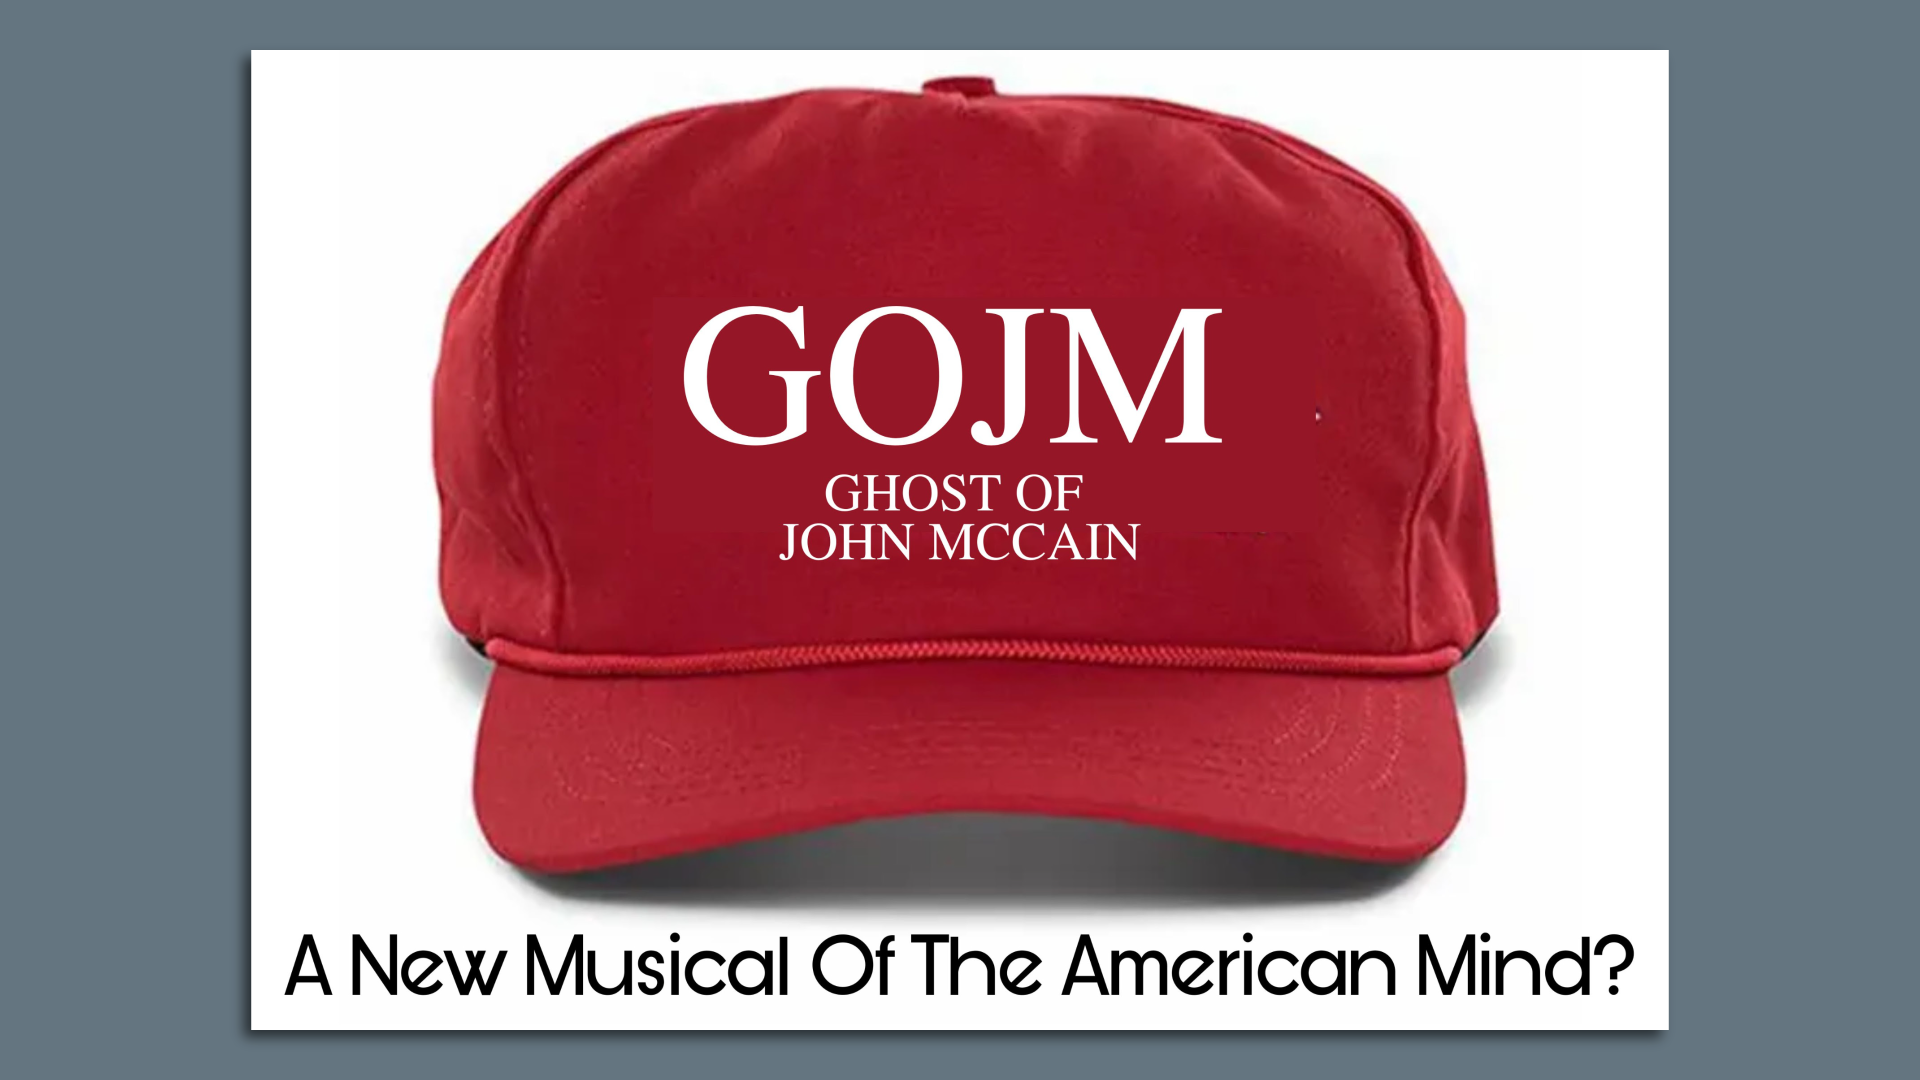 A red baseball cap with the letters G O J M and the words Ghost of John McCain on the front